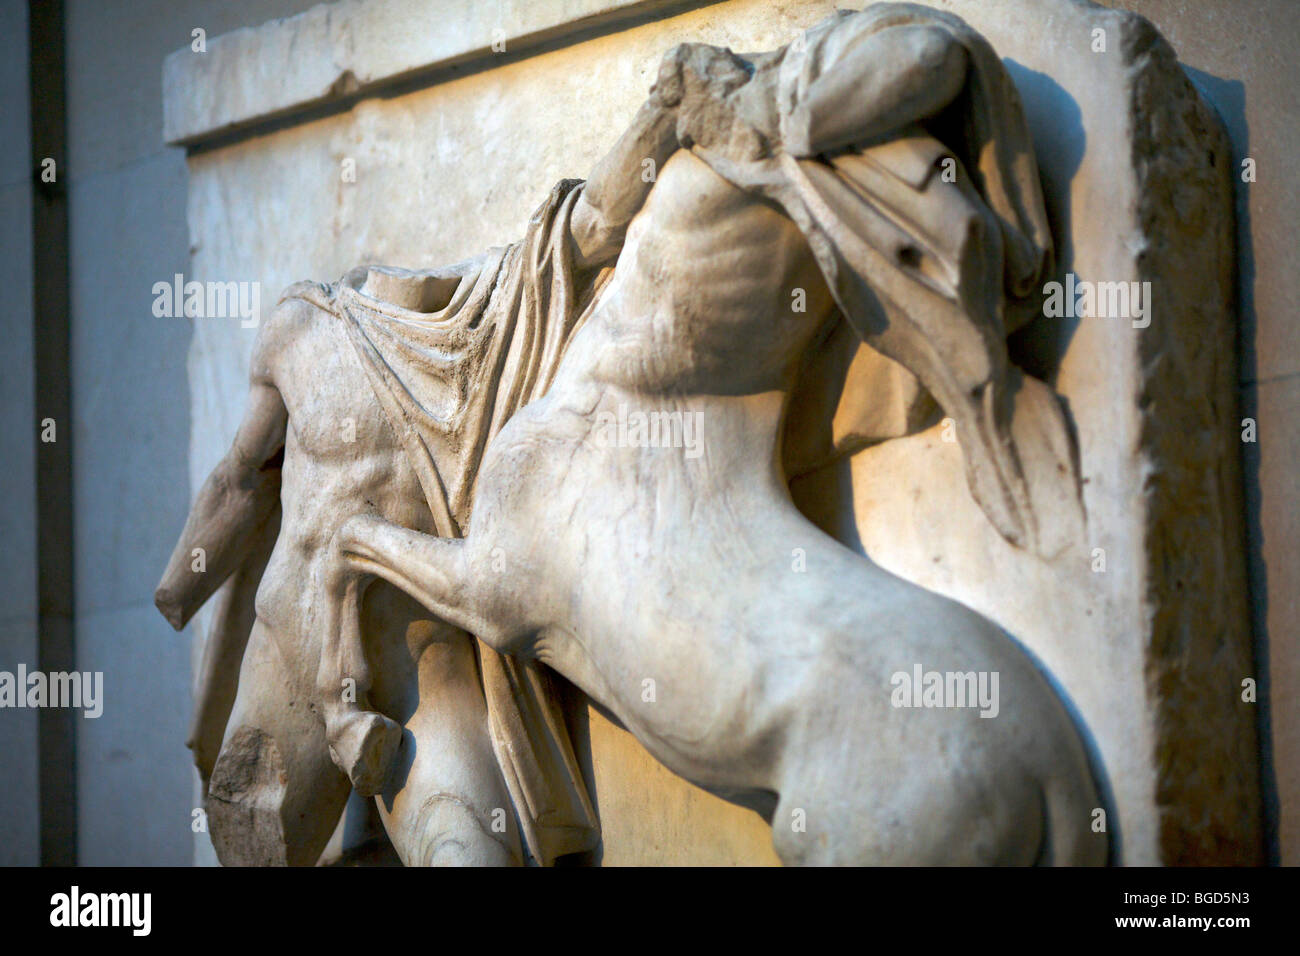 Details of the sculpted panels or meotopes from The Parthenon showing fight between Lapiths and centaurs in the British Museum Stock Photo